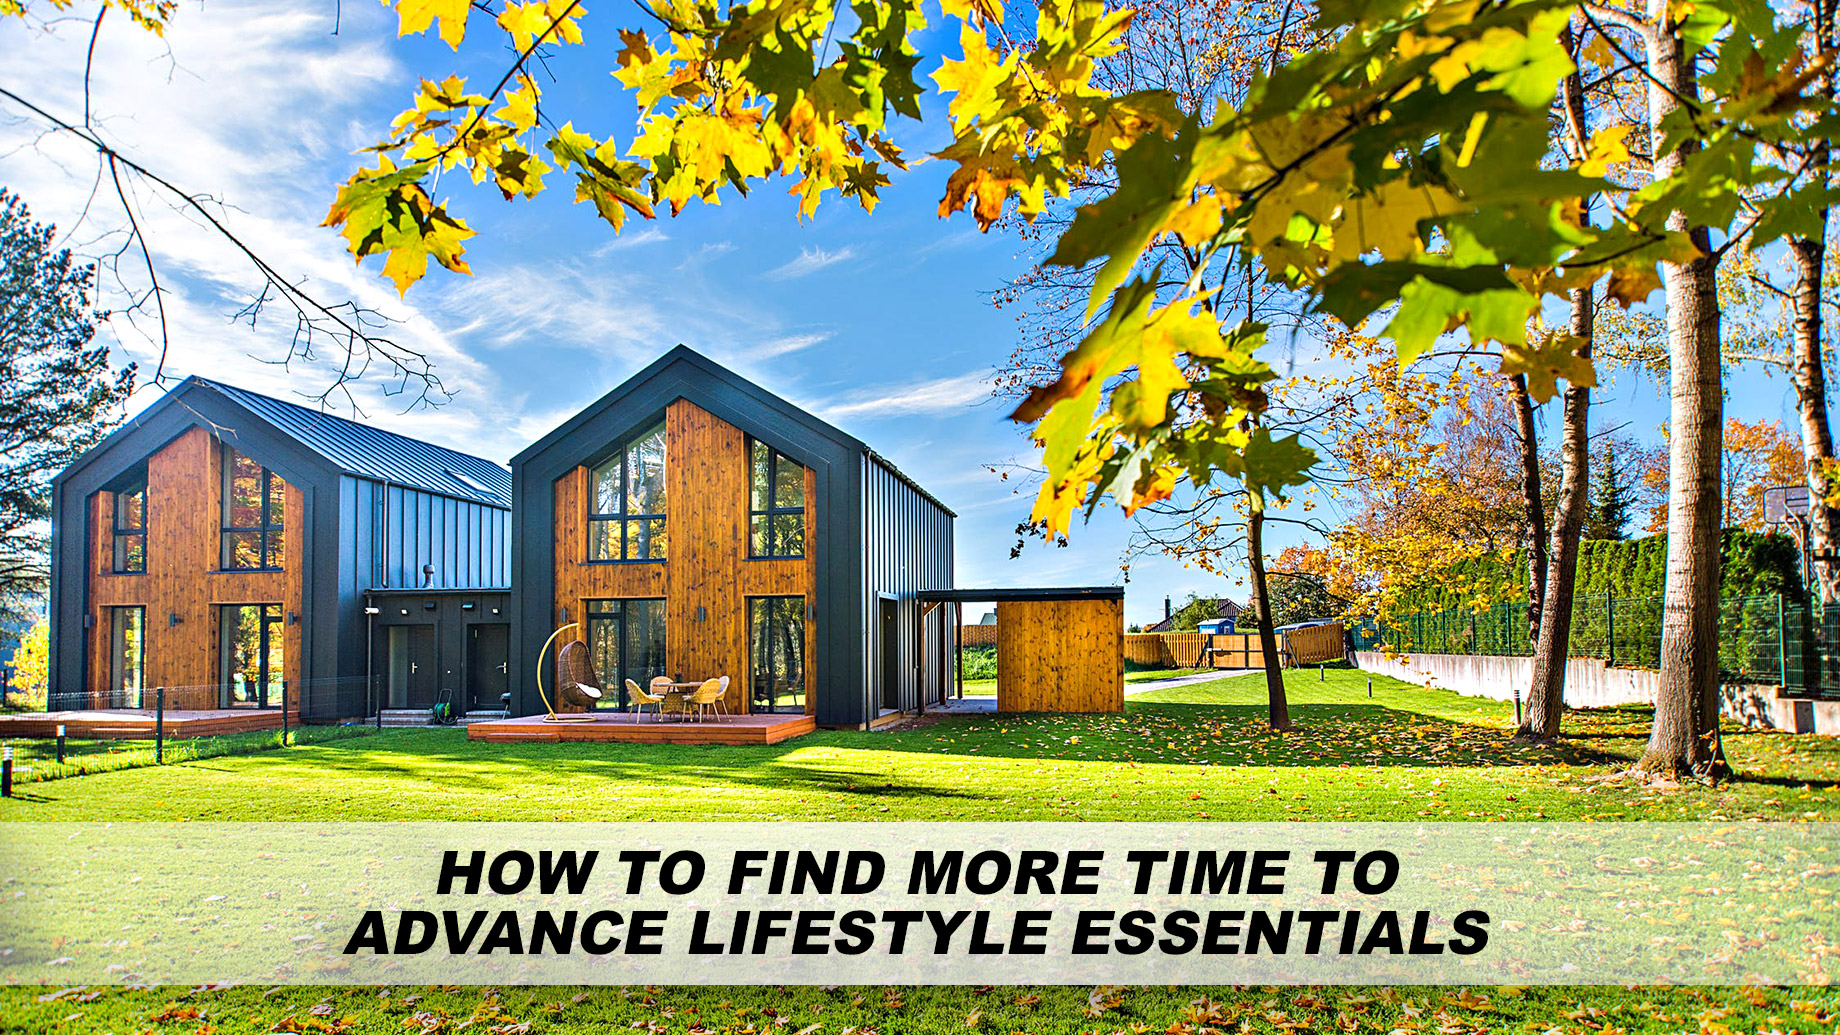 How to Find More Time to Advance Lifestyle Essentials